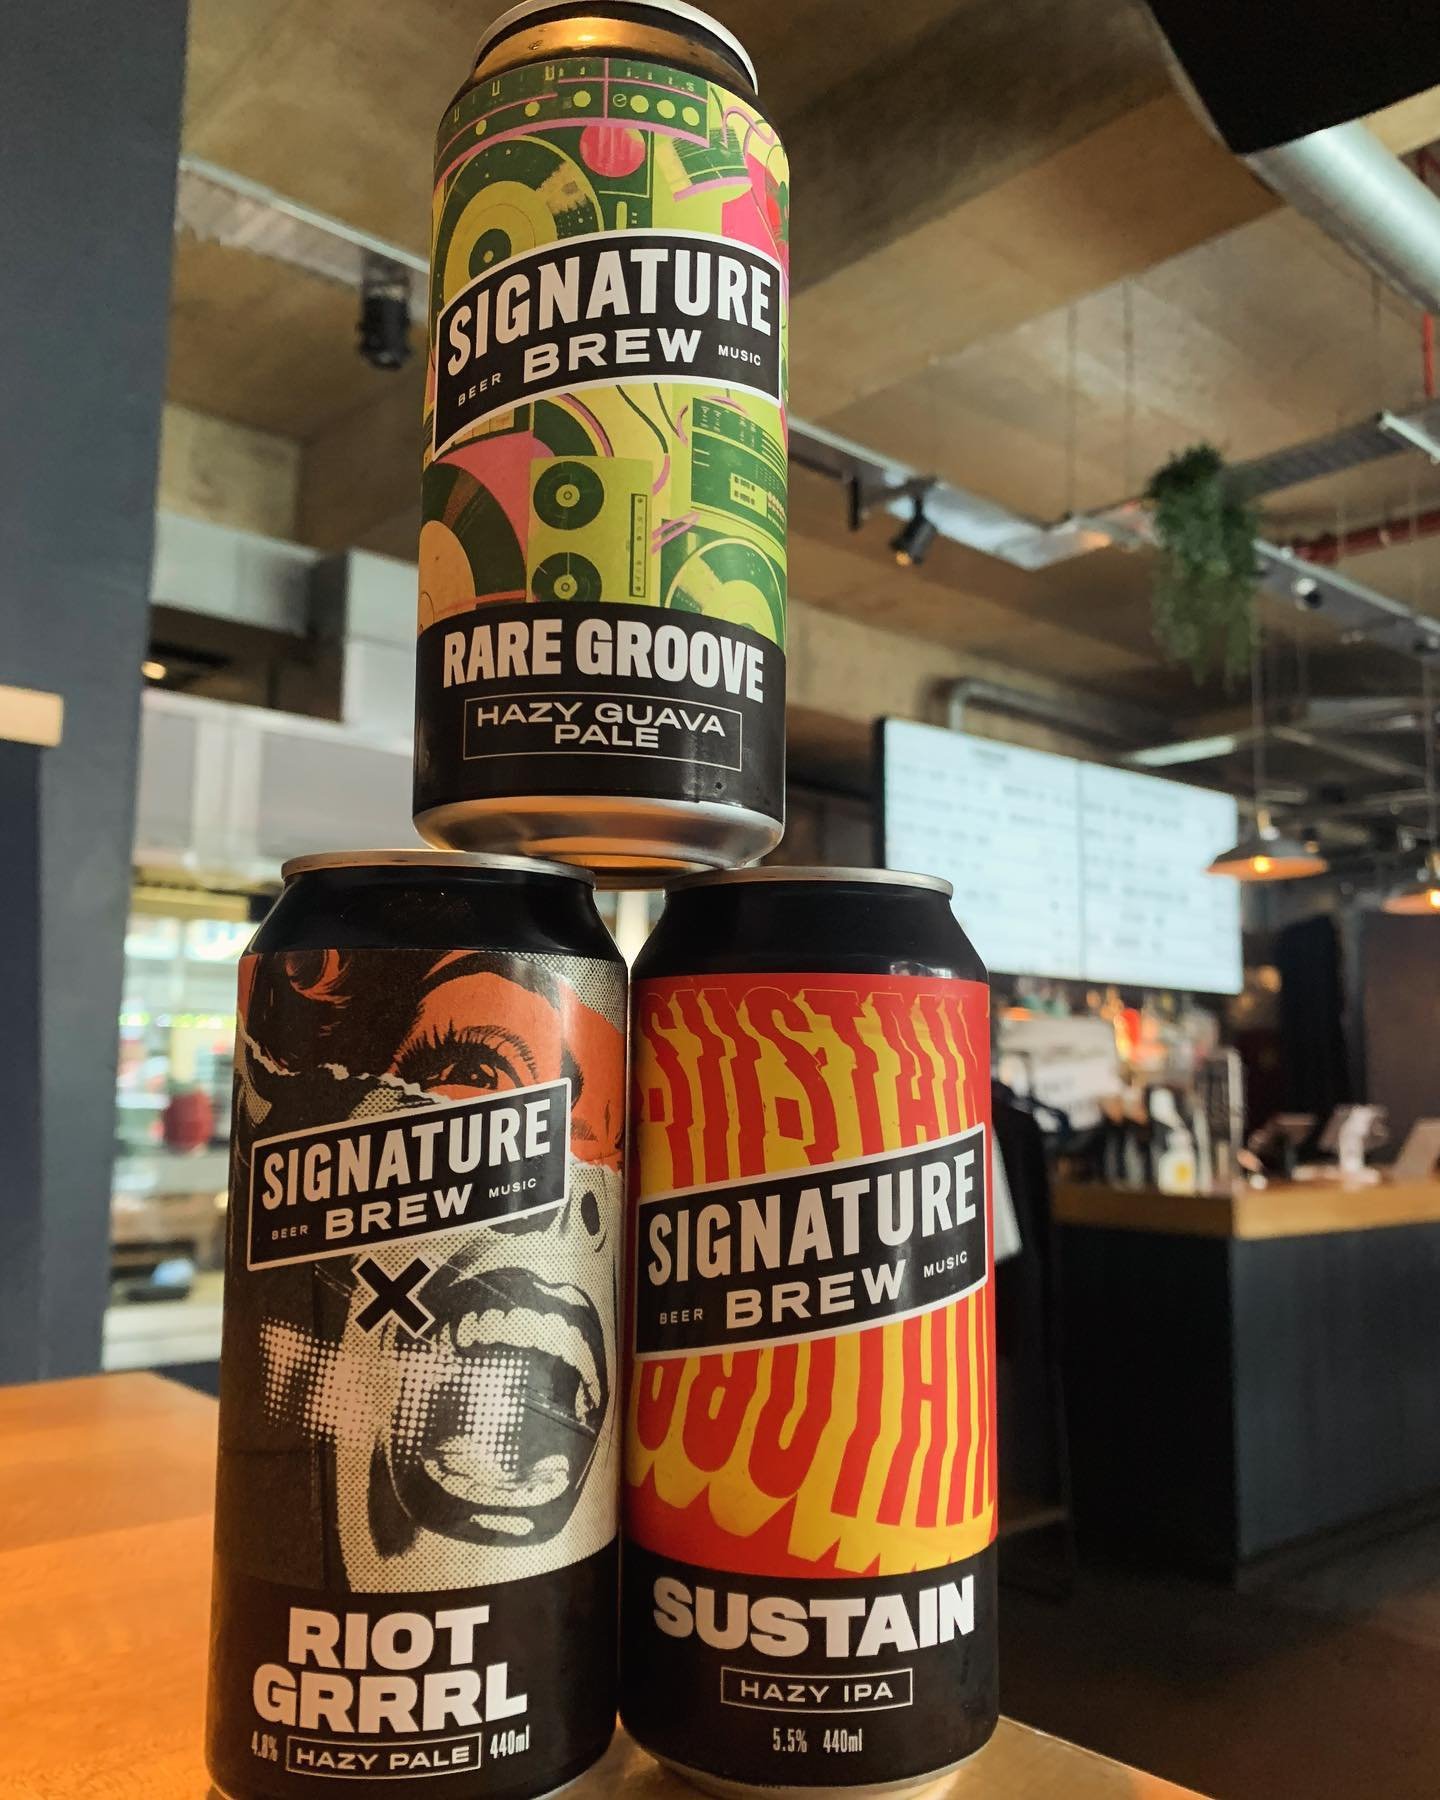 Can&rsquo;t see your fave special on the board? Don&rsquo;t forget we have all our @signaturebrew specials in cans too! 

Grab a few of them takeaway directly from us at The Collab and get a special takeaway discount! 

#signaturebrew #specials #cans